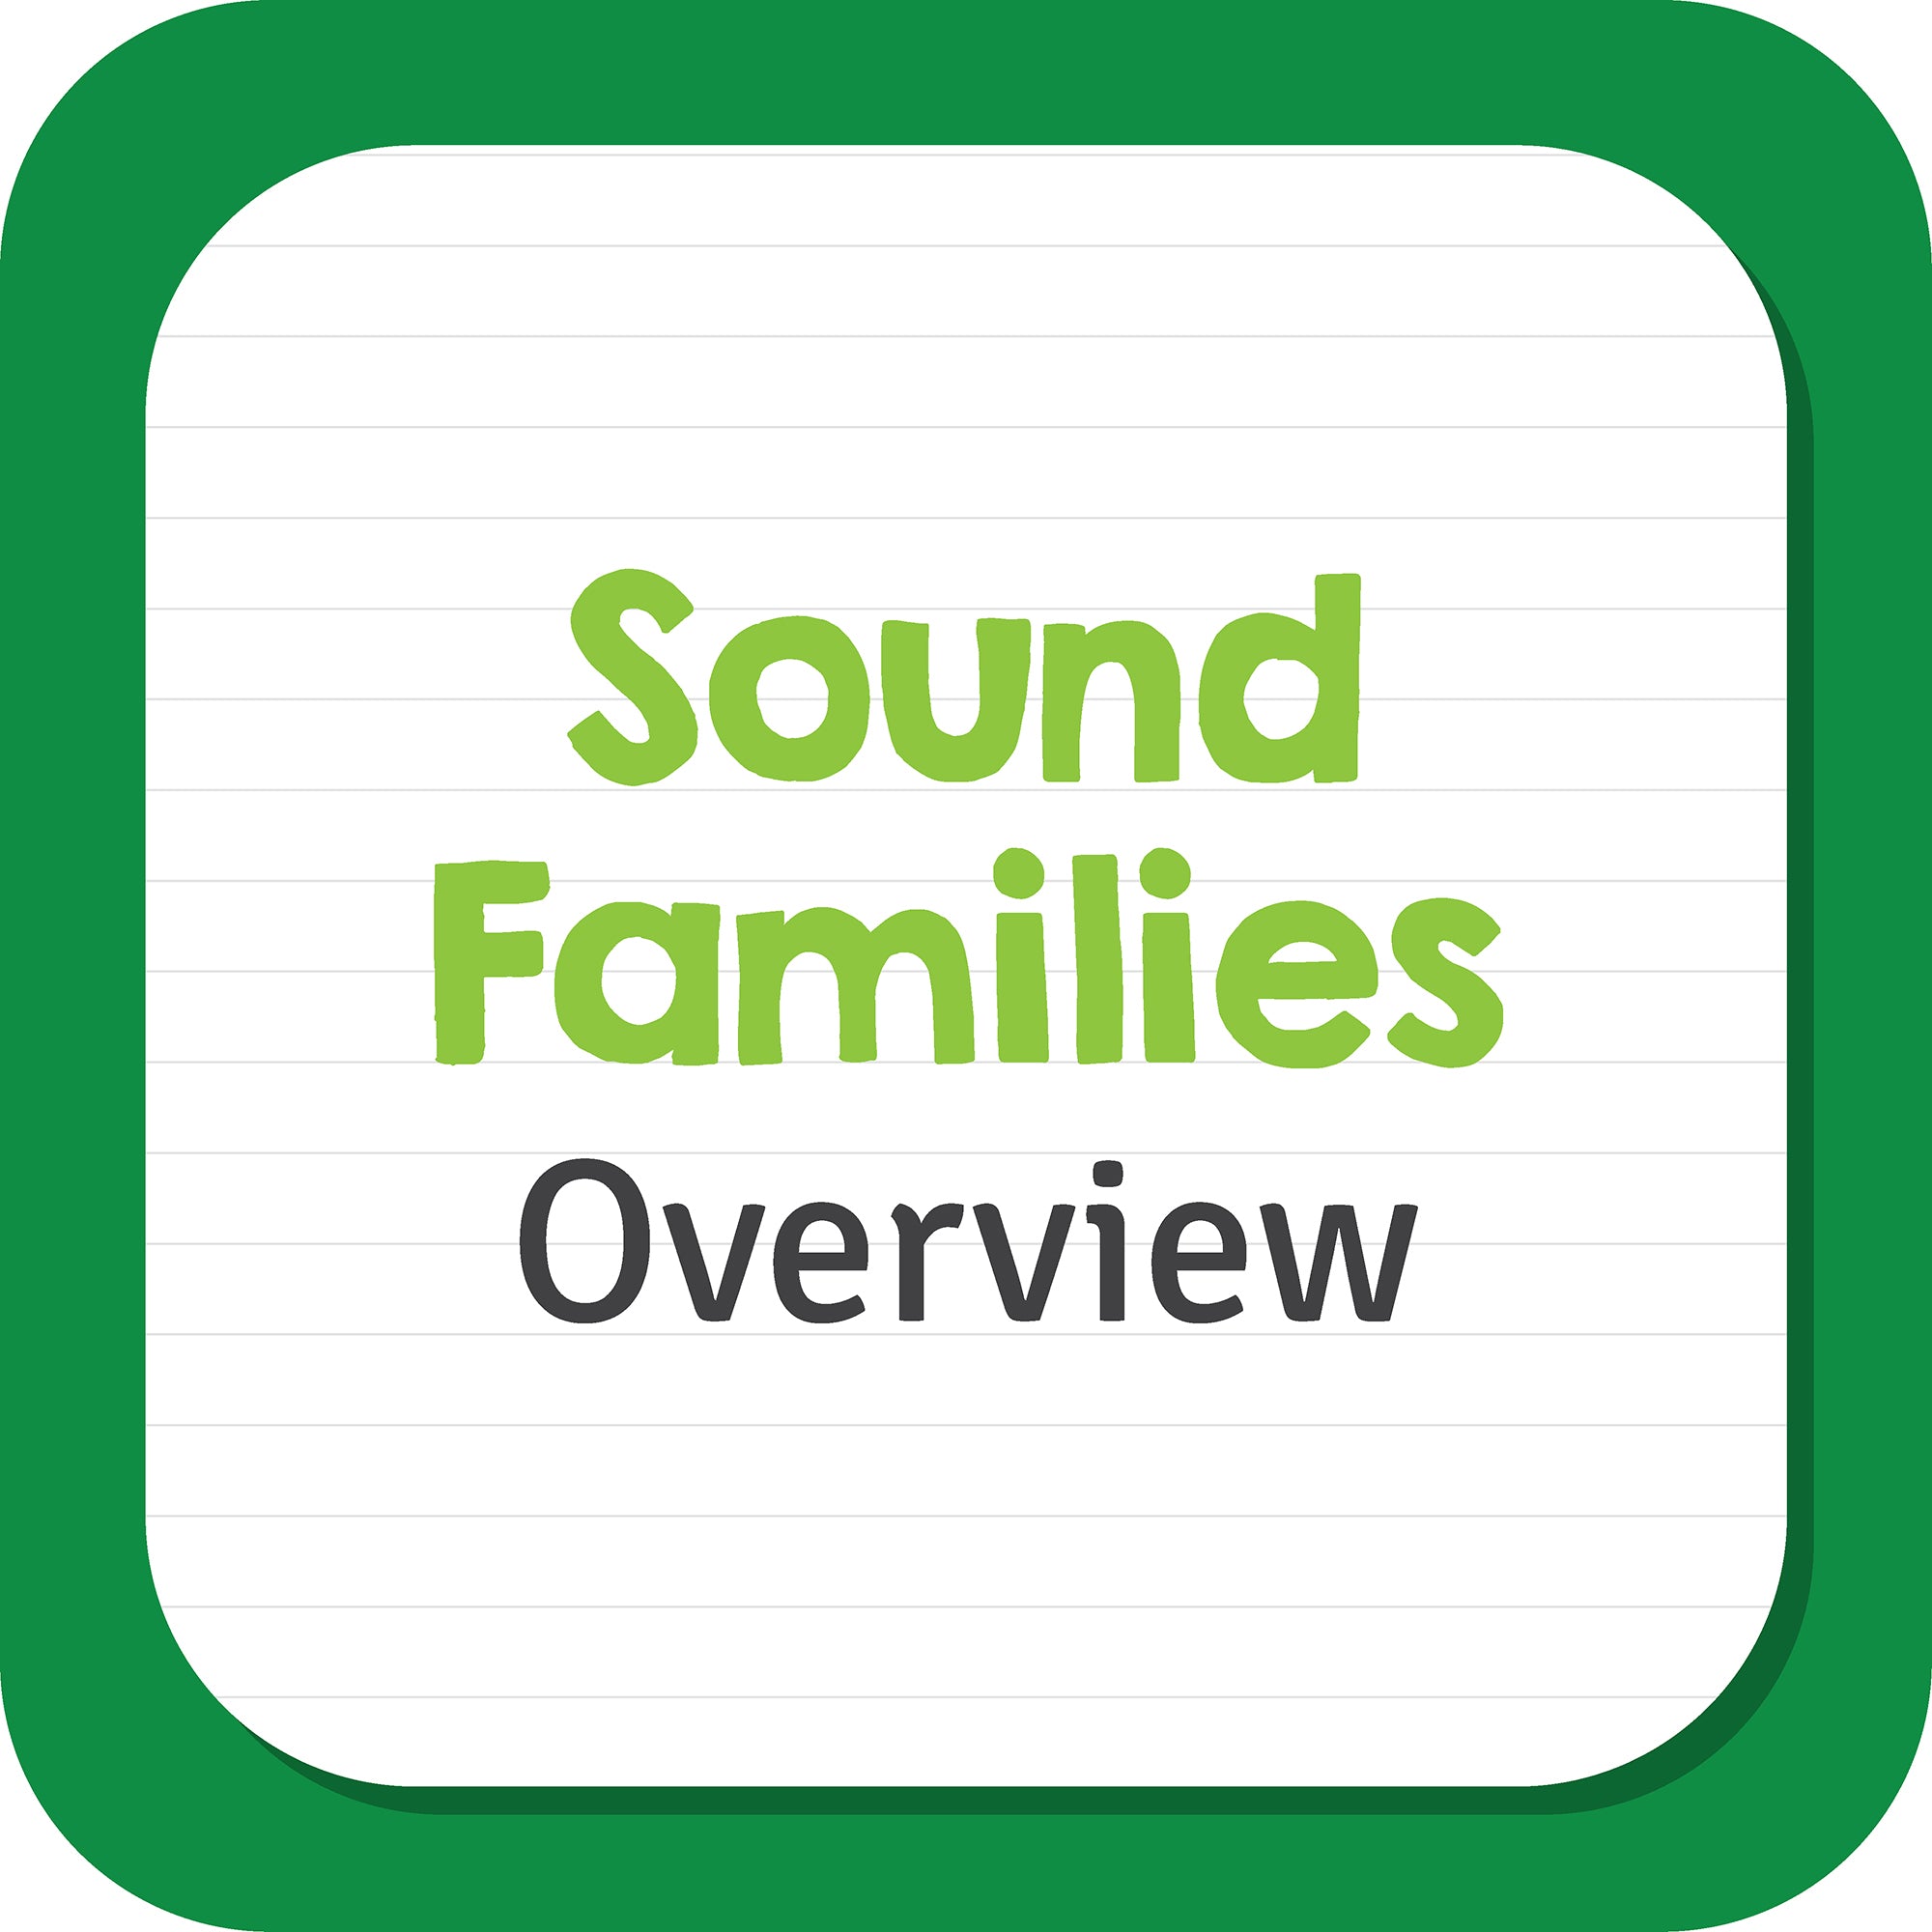 Sound Familes Overview